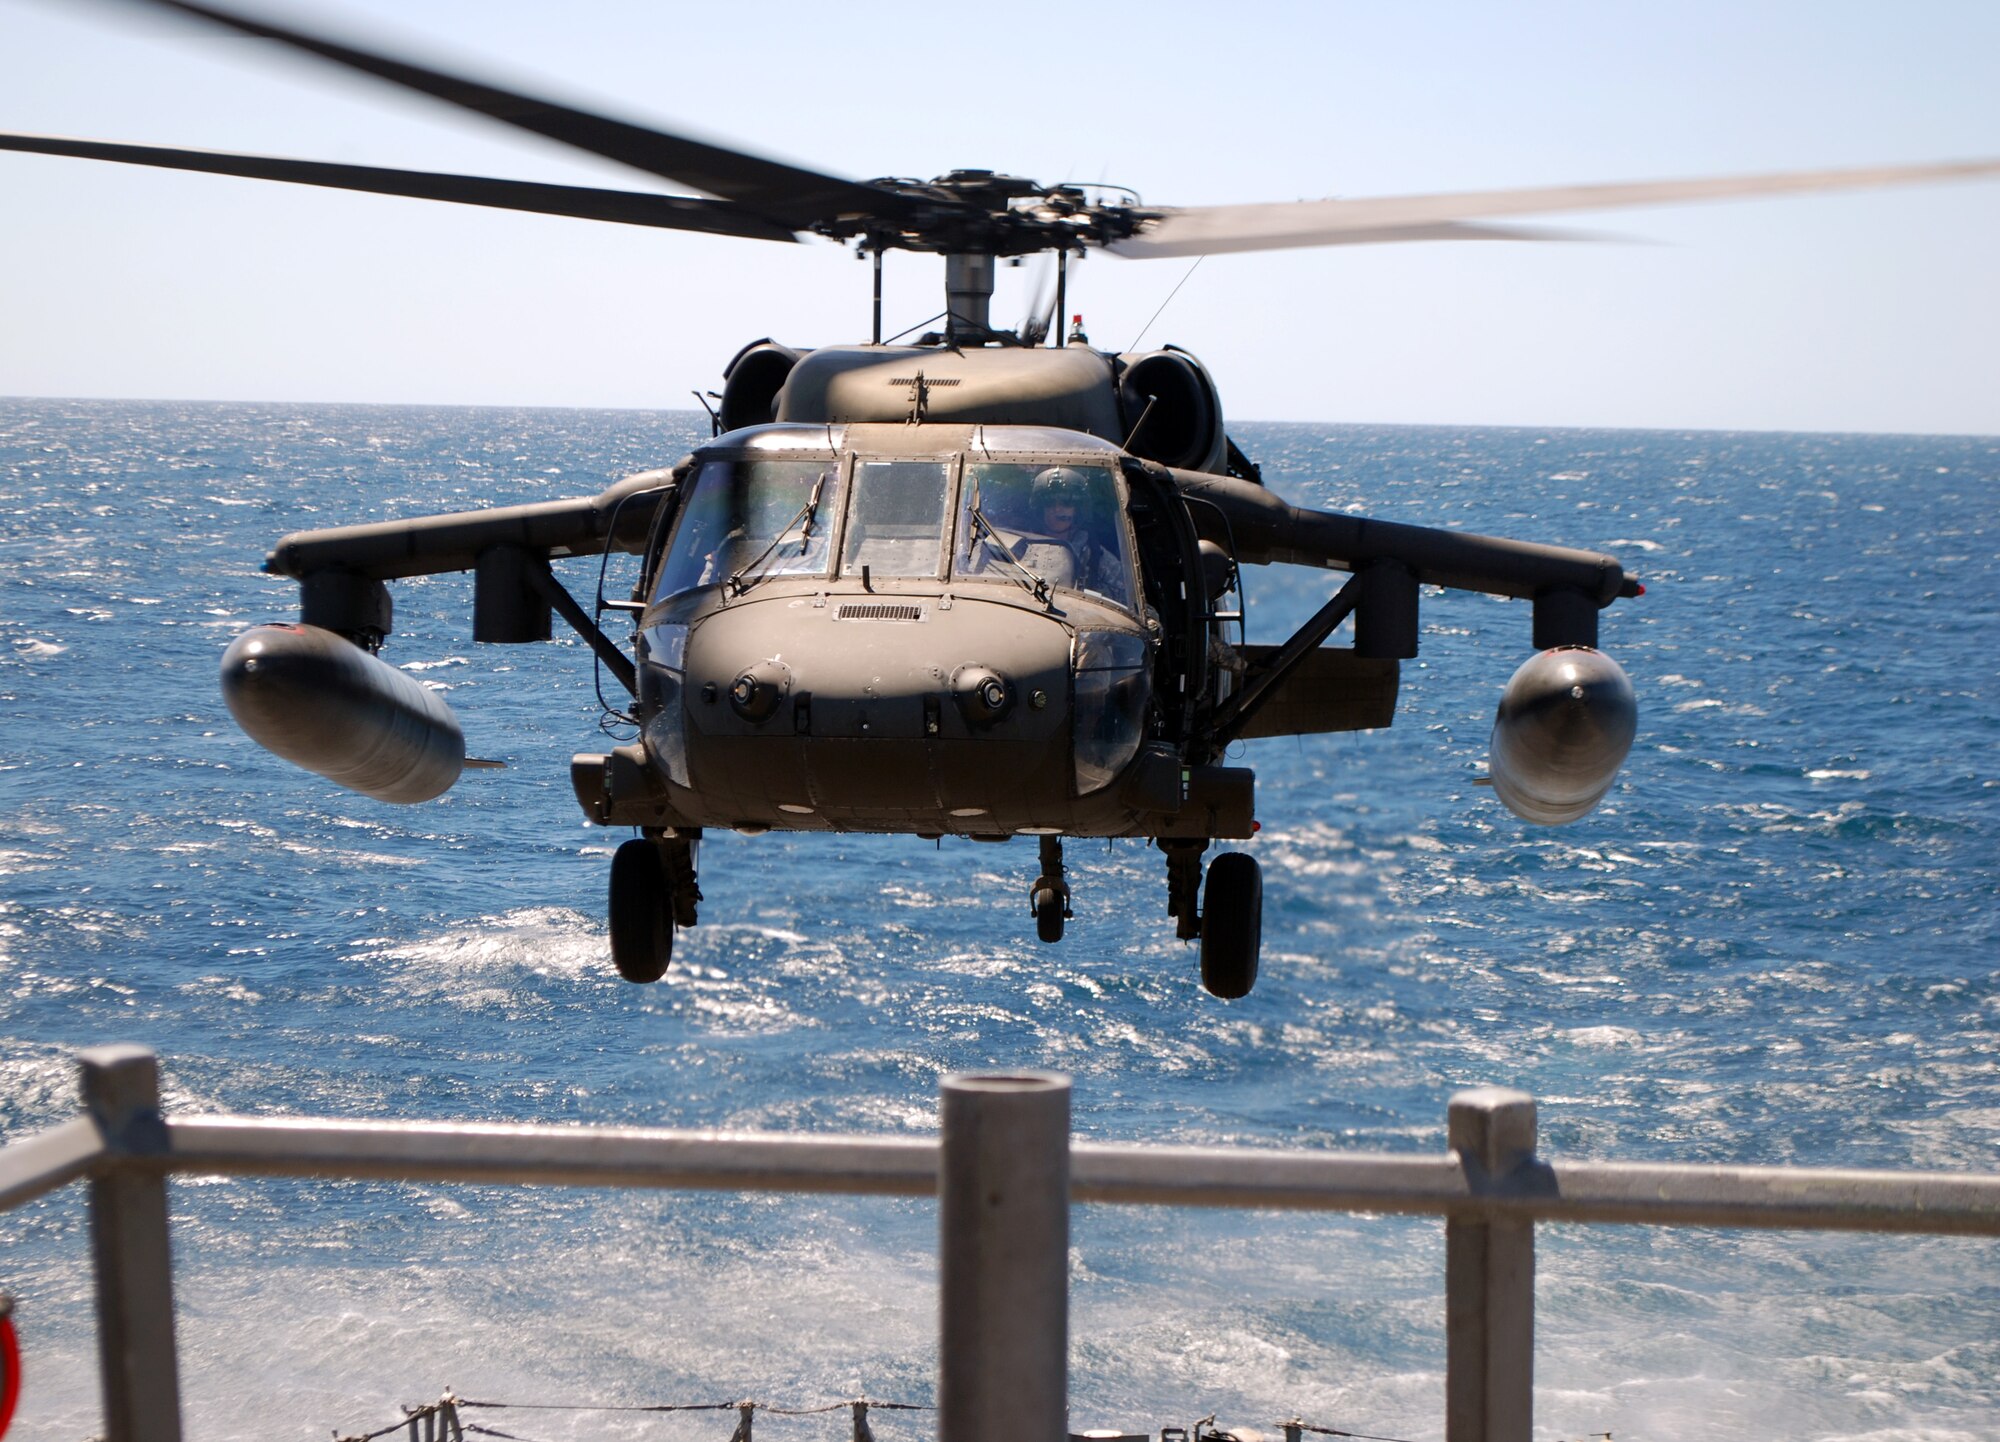 A UH-60 Blackhawk helicopter assigned to Joint Task Force Bravo's 1-228th Aviation Regiment makes an approach for a landing on the deck of the USS Rentz during deck landing qualification training off the coast of Honduras, Feb. 8, 2014. The training, which was conducted approximately 70 miles off the coast of Honduras, was done to qualify 1-228th pilots and crew chiefs on shipboard operations. (Courtesy photo)